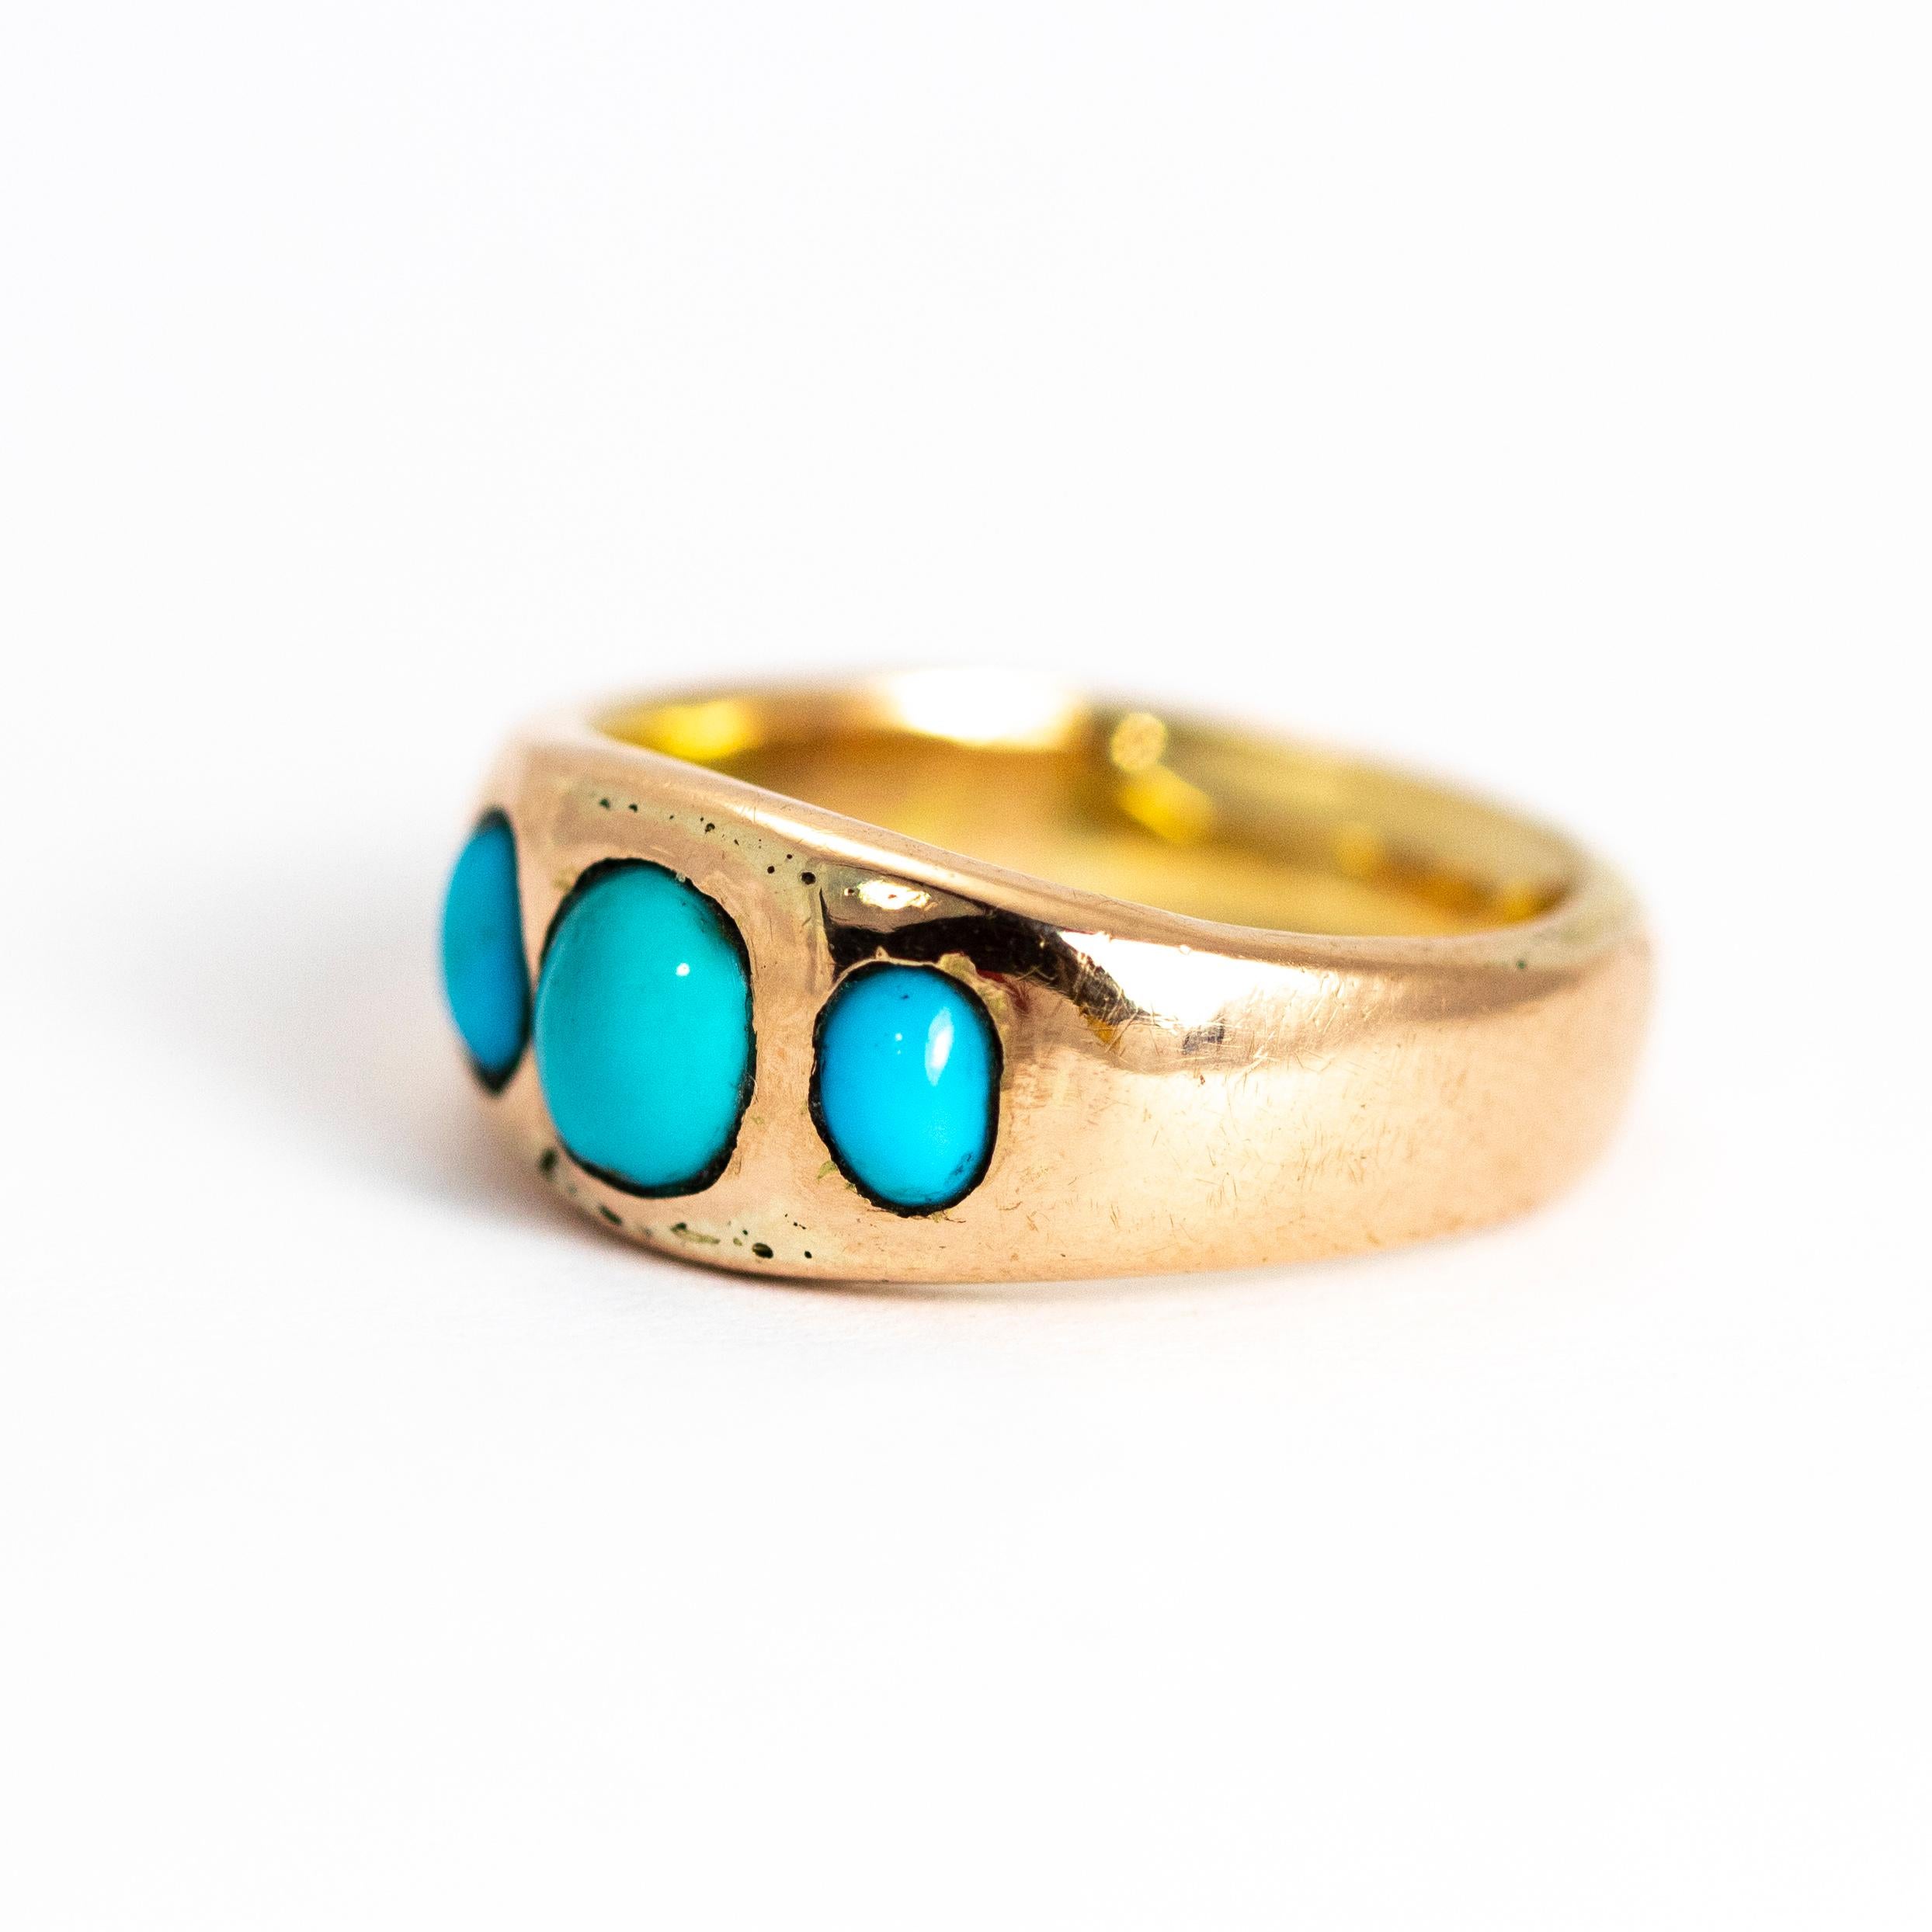 The pop of the bright turquoise next to the glossy gold band makes the perfect pairing. The centre circular stone is slightly larger than the two smaller oval stones. The way the stones are set into this gold band give the ring a sort of lovely